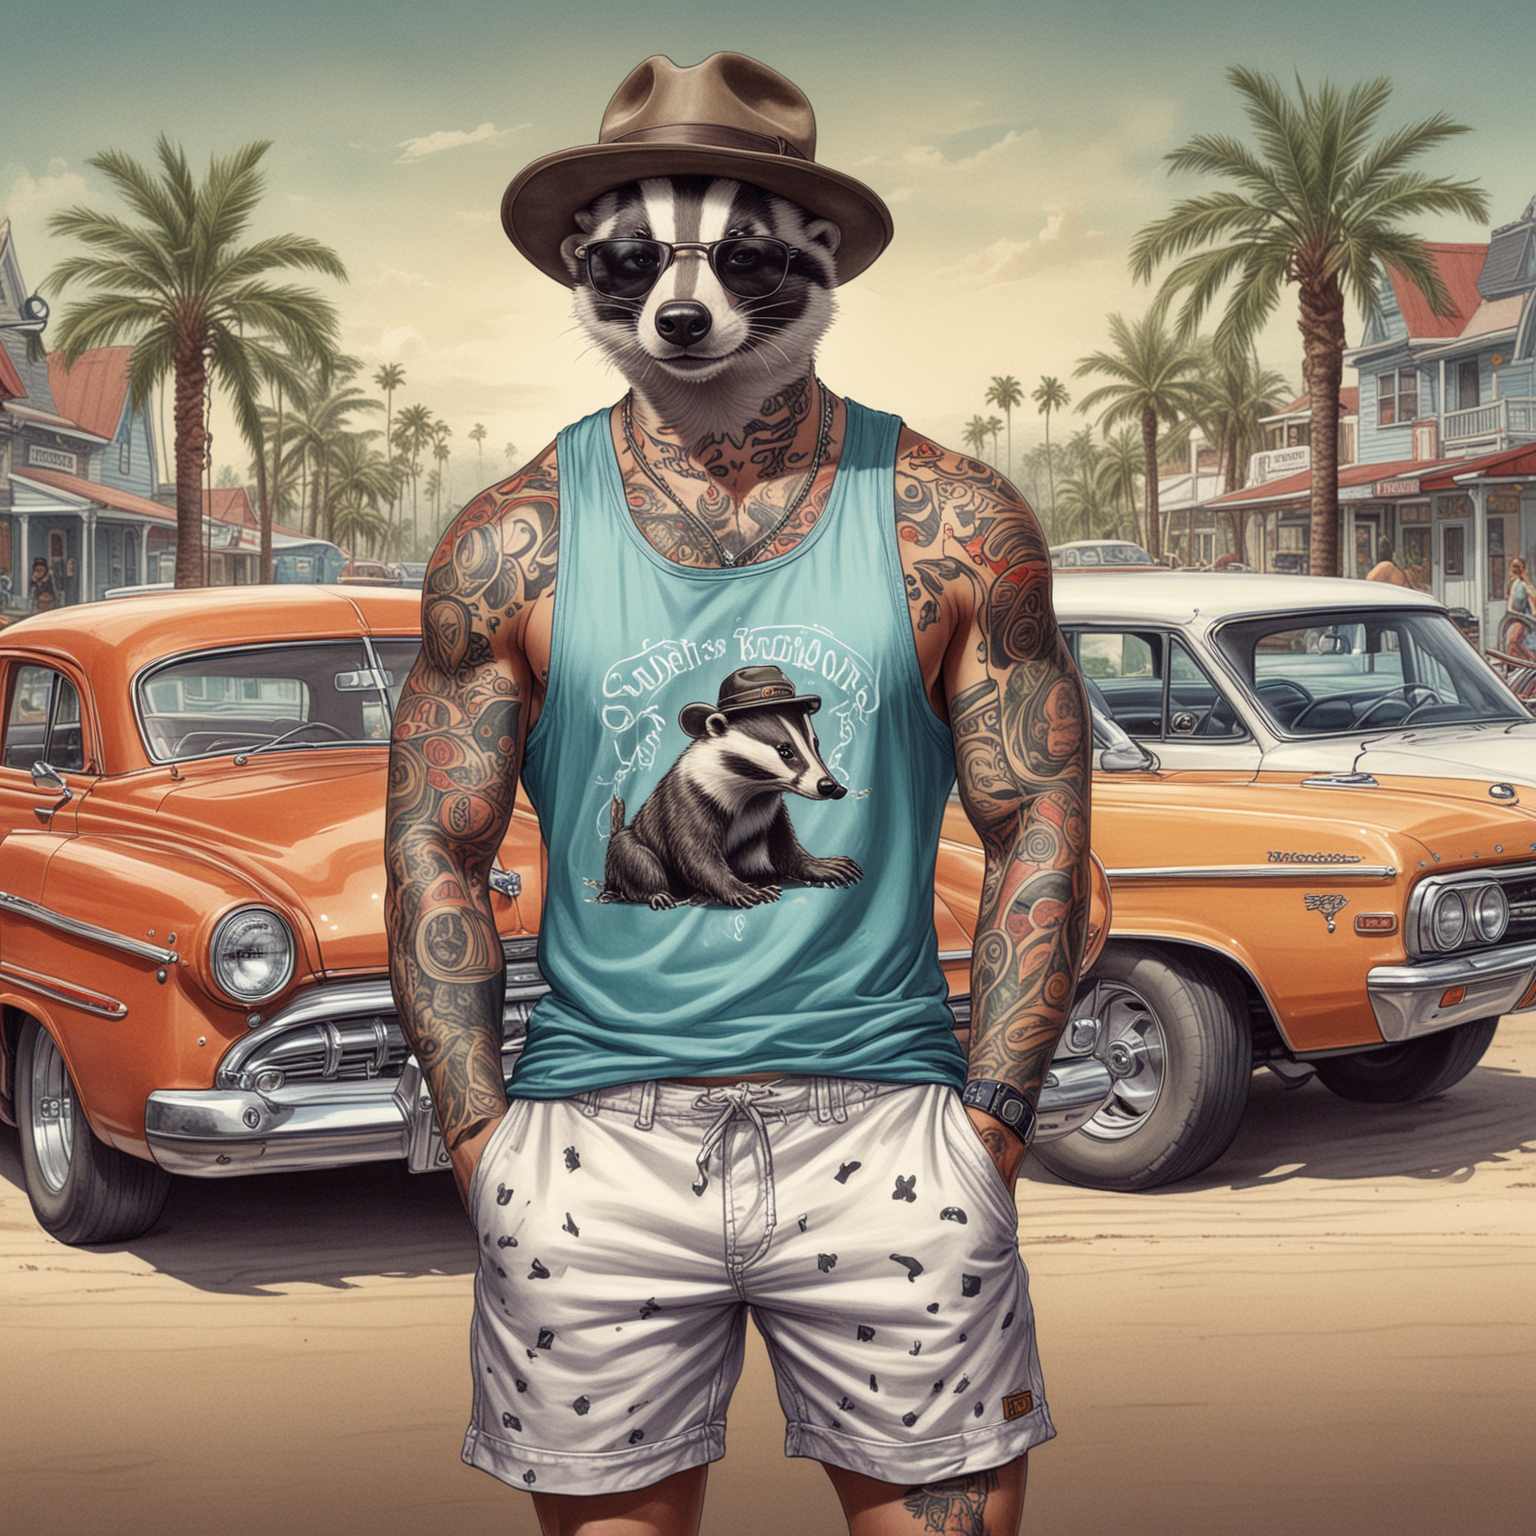 Badger in Summer Attire Stands by Classic Low Rider Cars